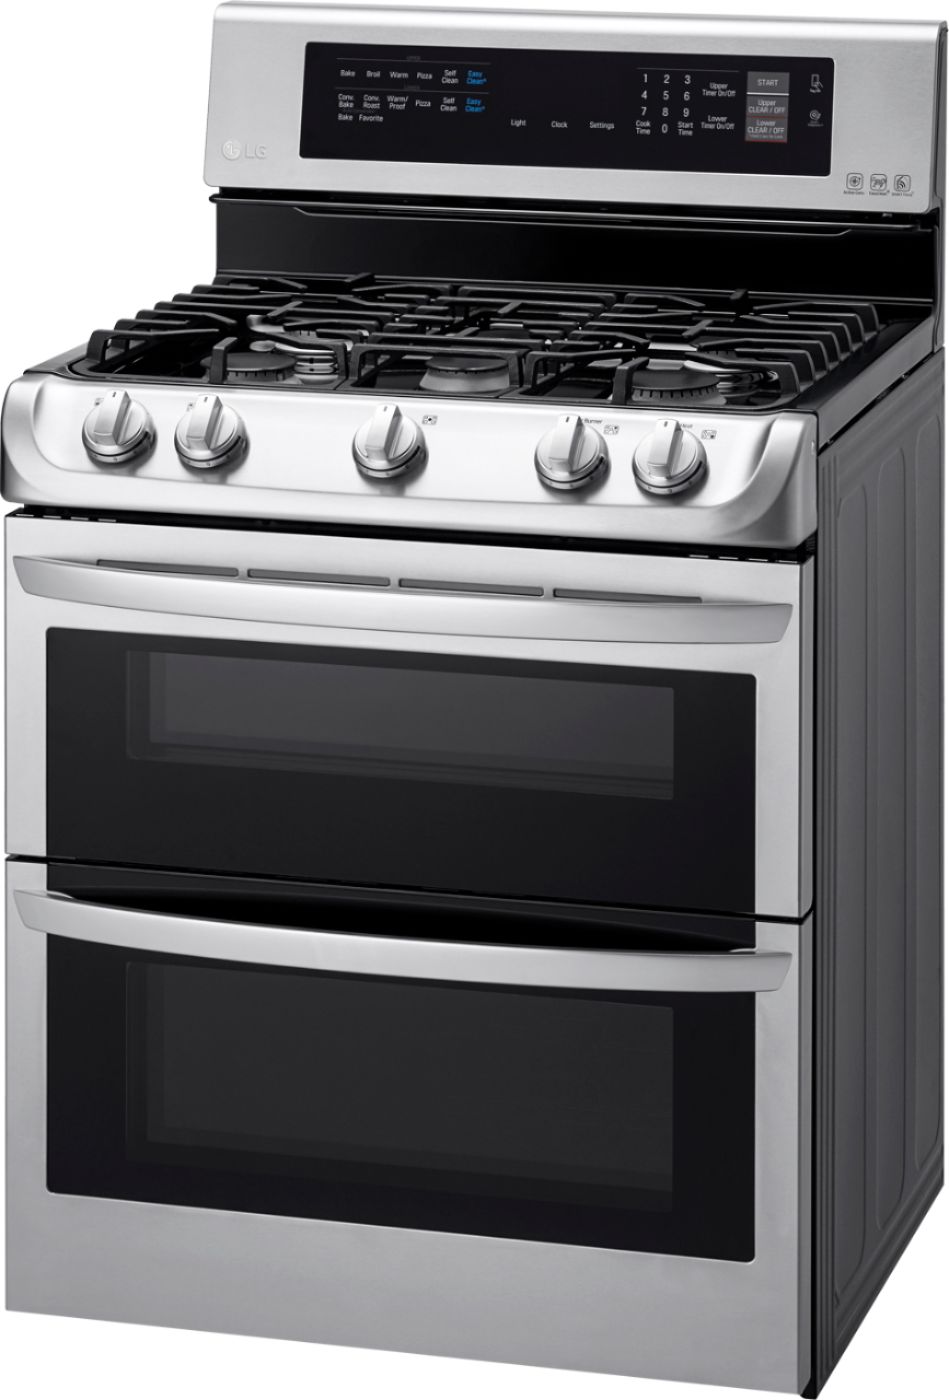 Left View: Samsung - 6.0 Cu. Ft. Front Control Slide-in Gas Range with Smart Dial, Air Fry & Wi-Fi, Fingerprint Resistant - Tuscan stainless steel